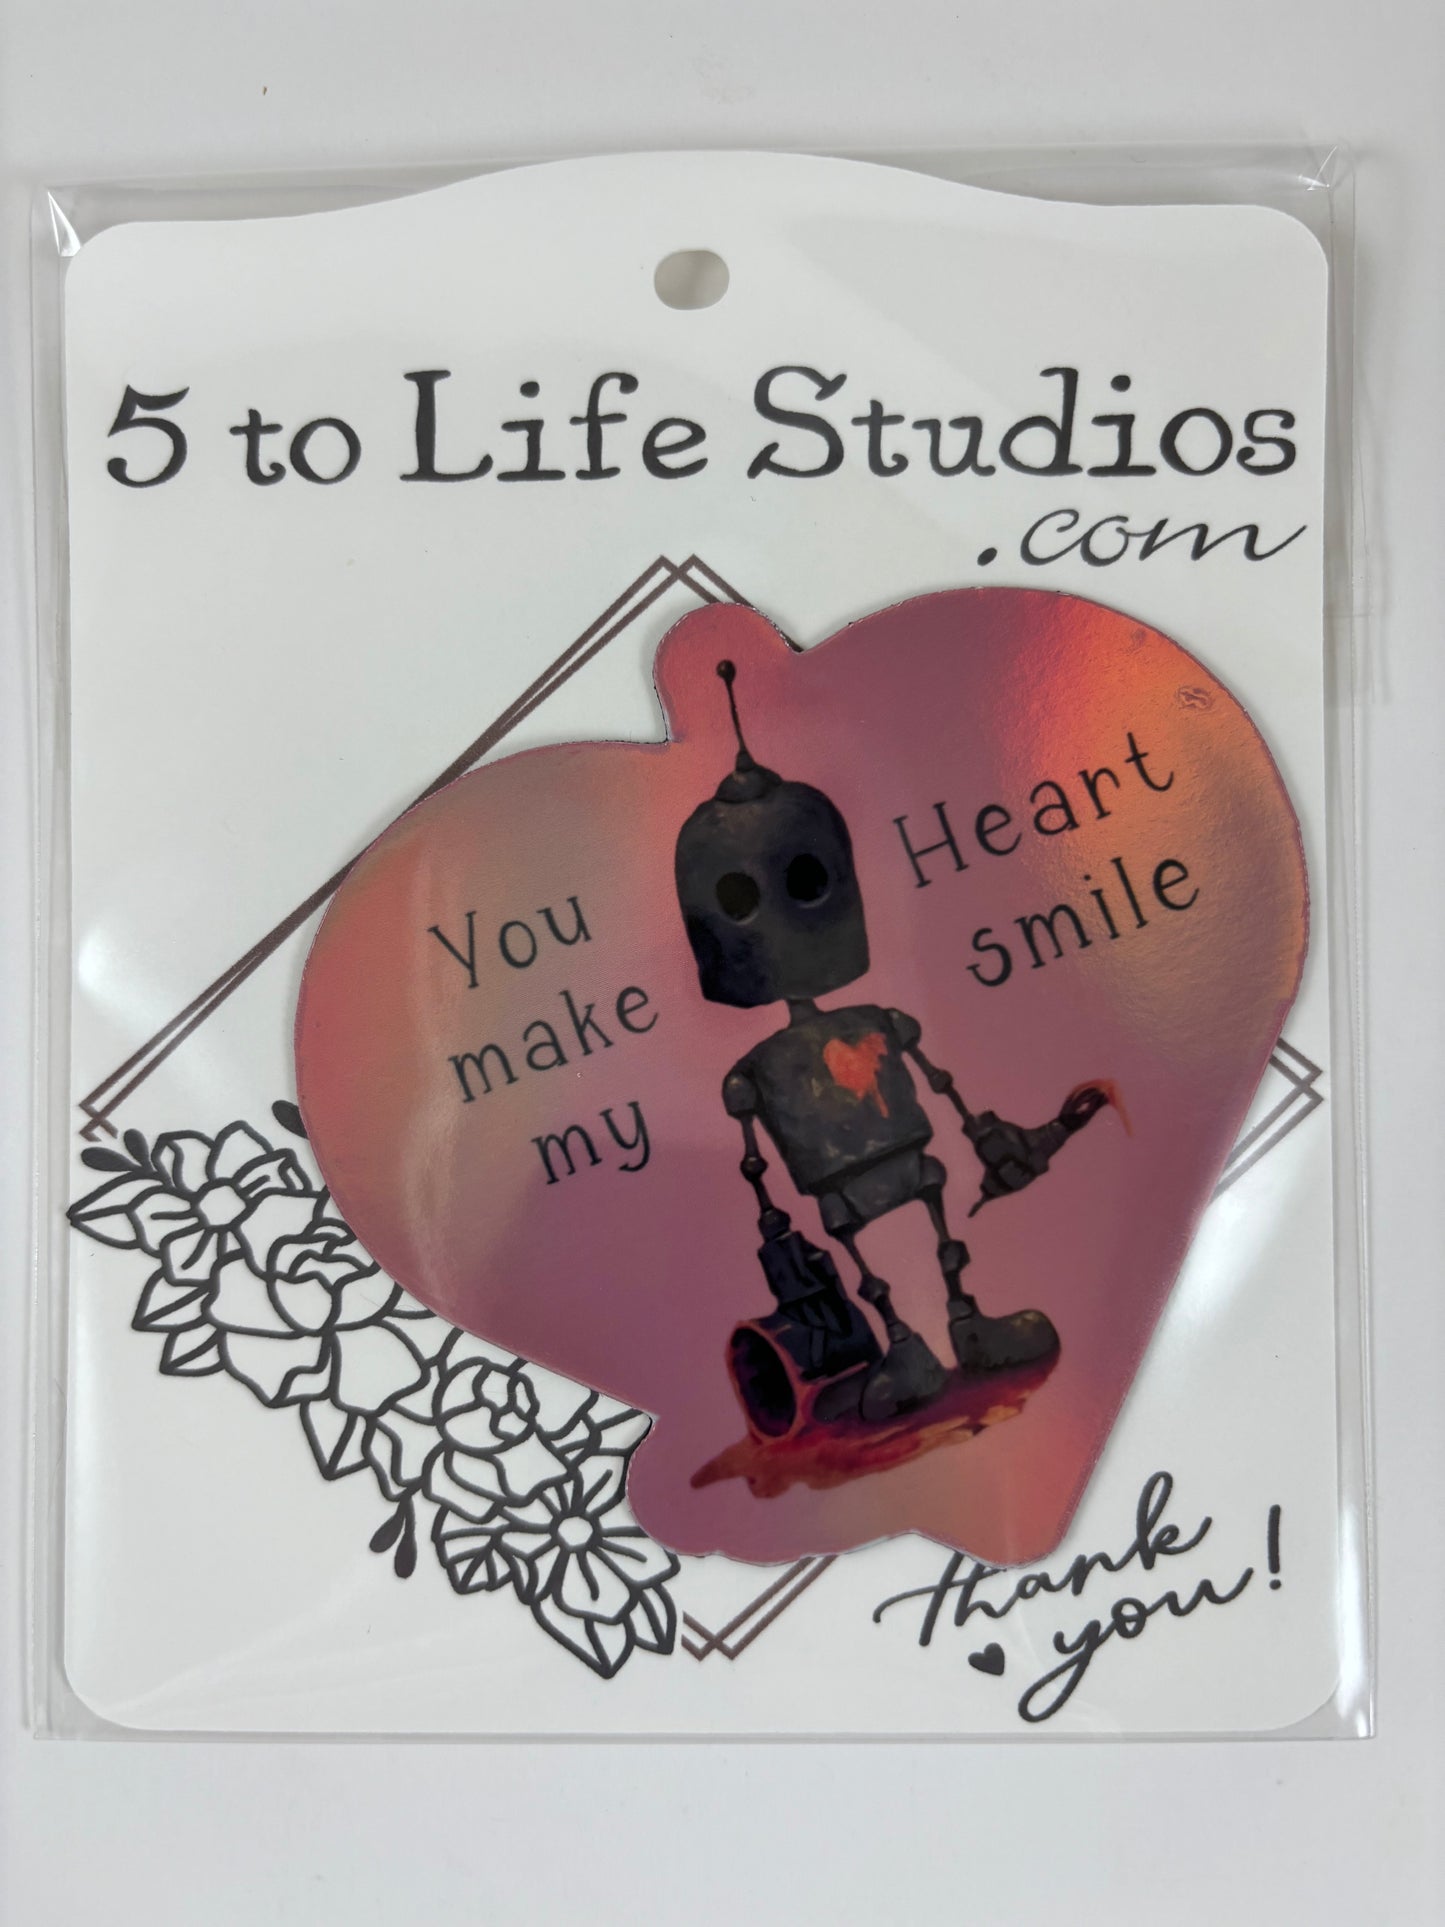 "You make my heart smile" (featuring The Lovebot) Refrigerator Magnet